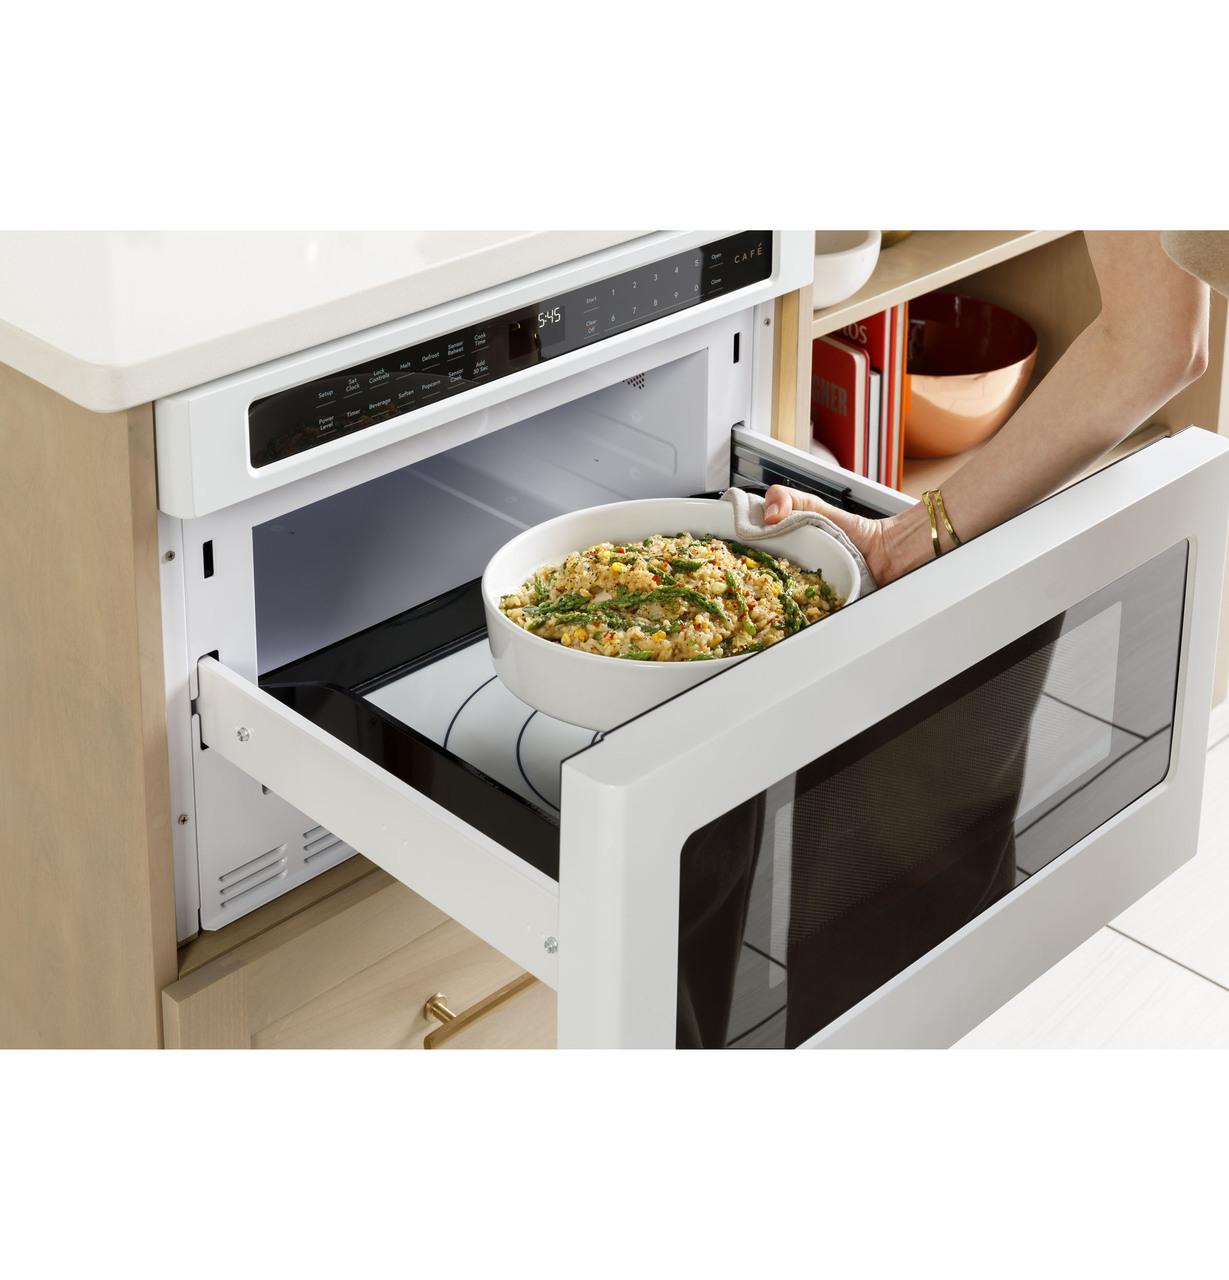 KitchenAid 24-inch, 1.2 cu. ft. Under-Counter Microwave Oven Drawer KM